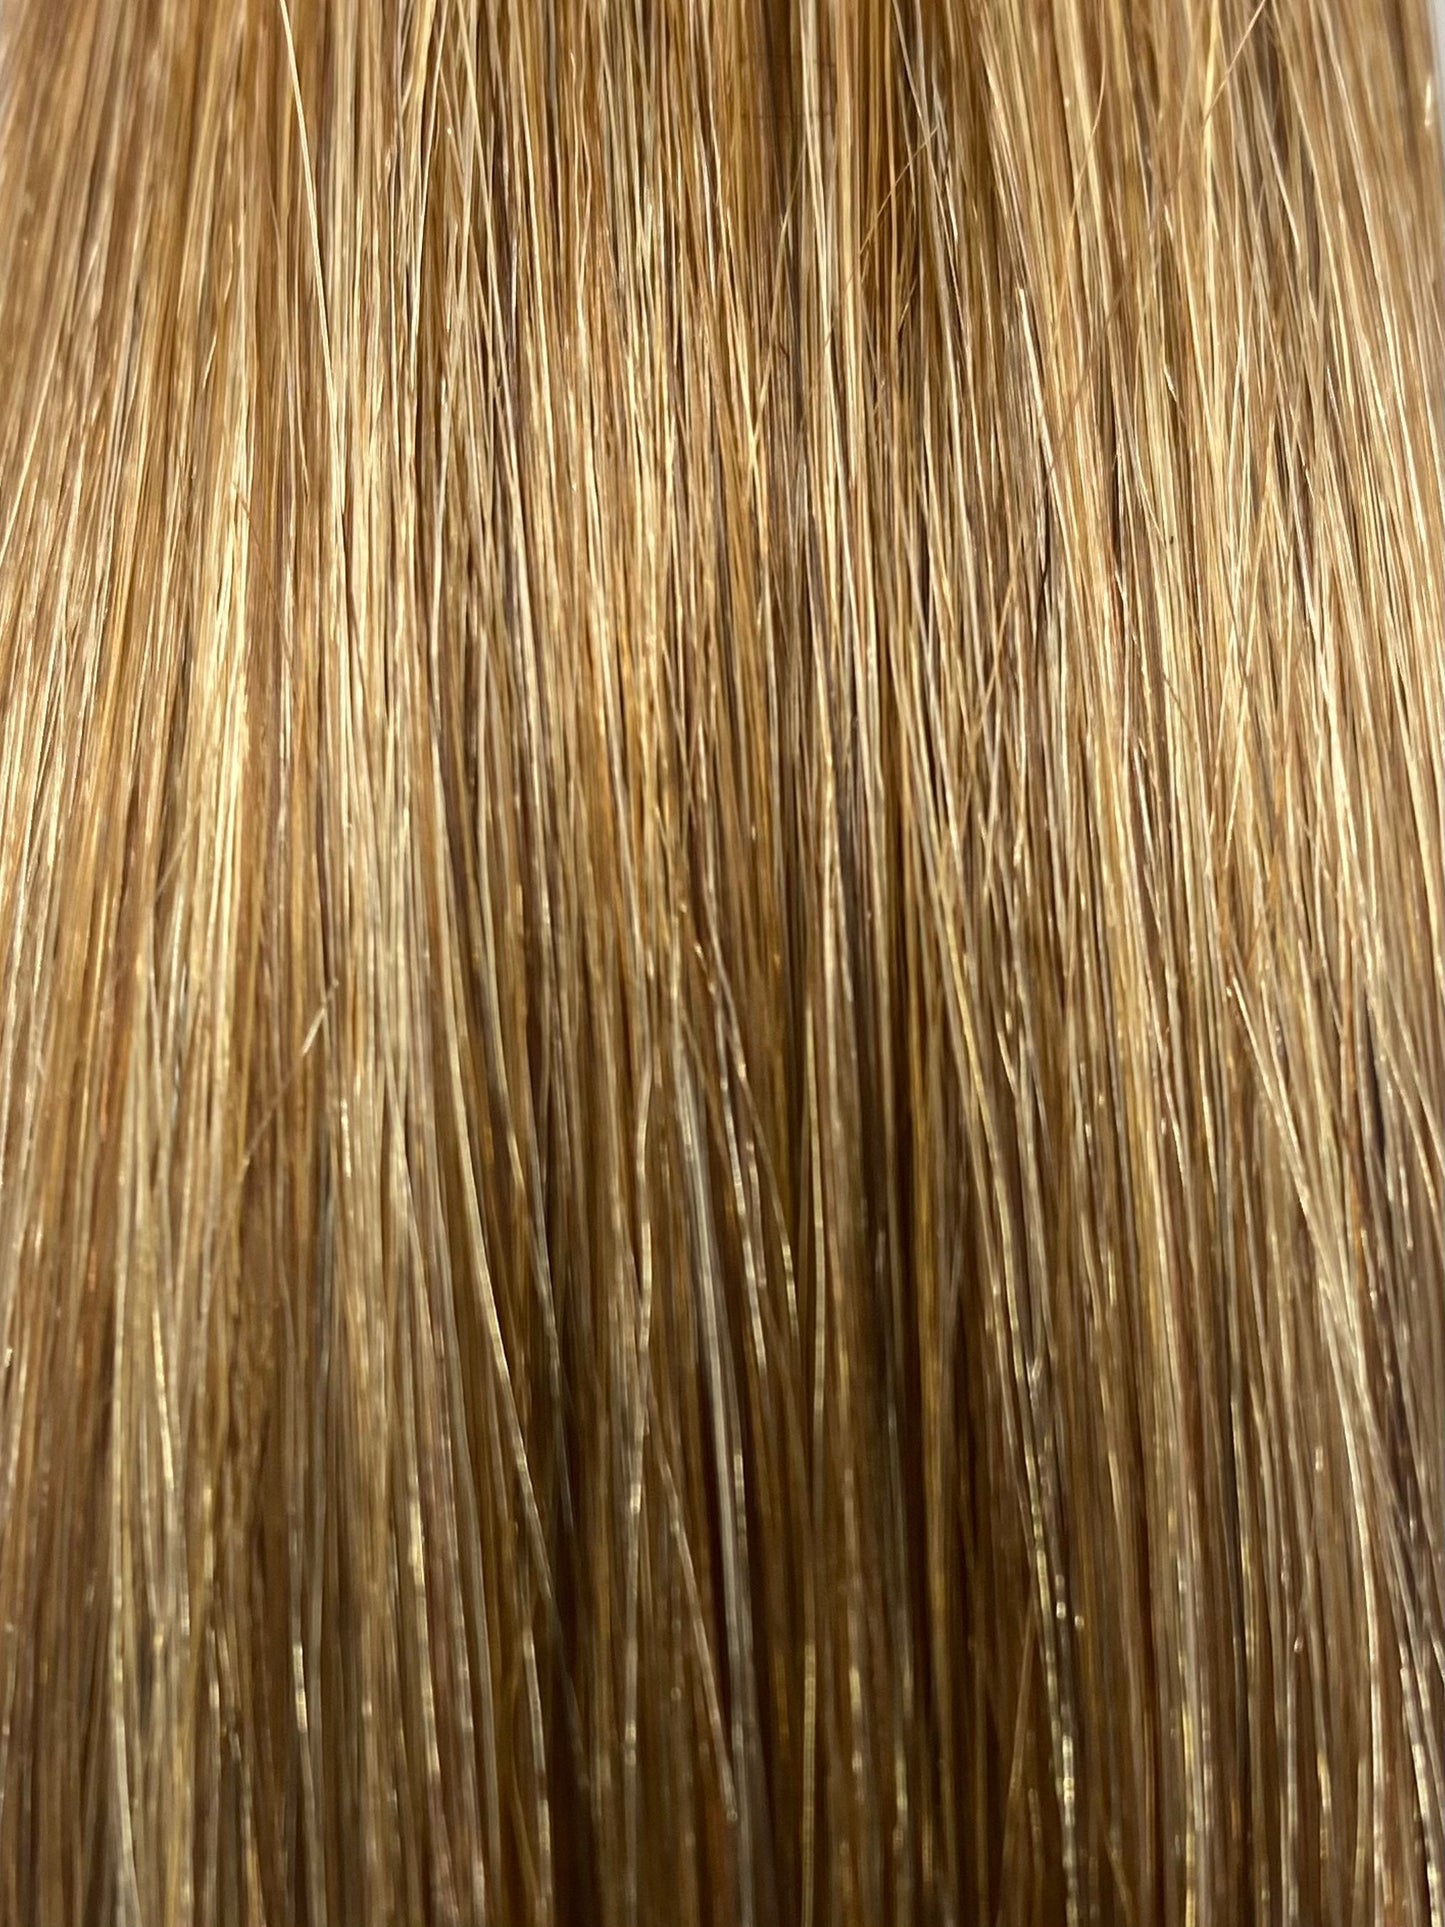 Weft hair extensions #18/24 - Double - 24 inches - Dark Blond / Ash Blonde Highlight Weft DR Hair Products Co 